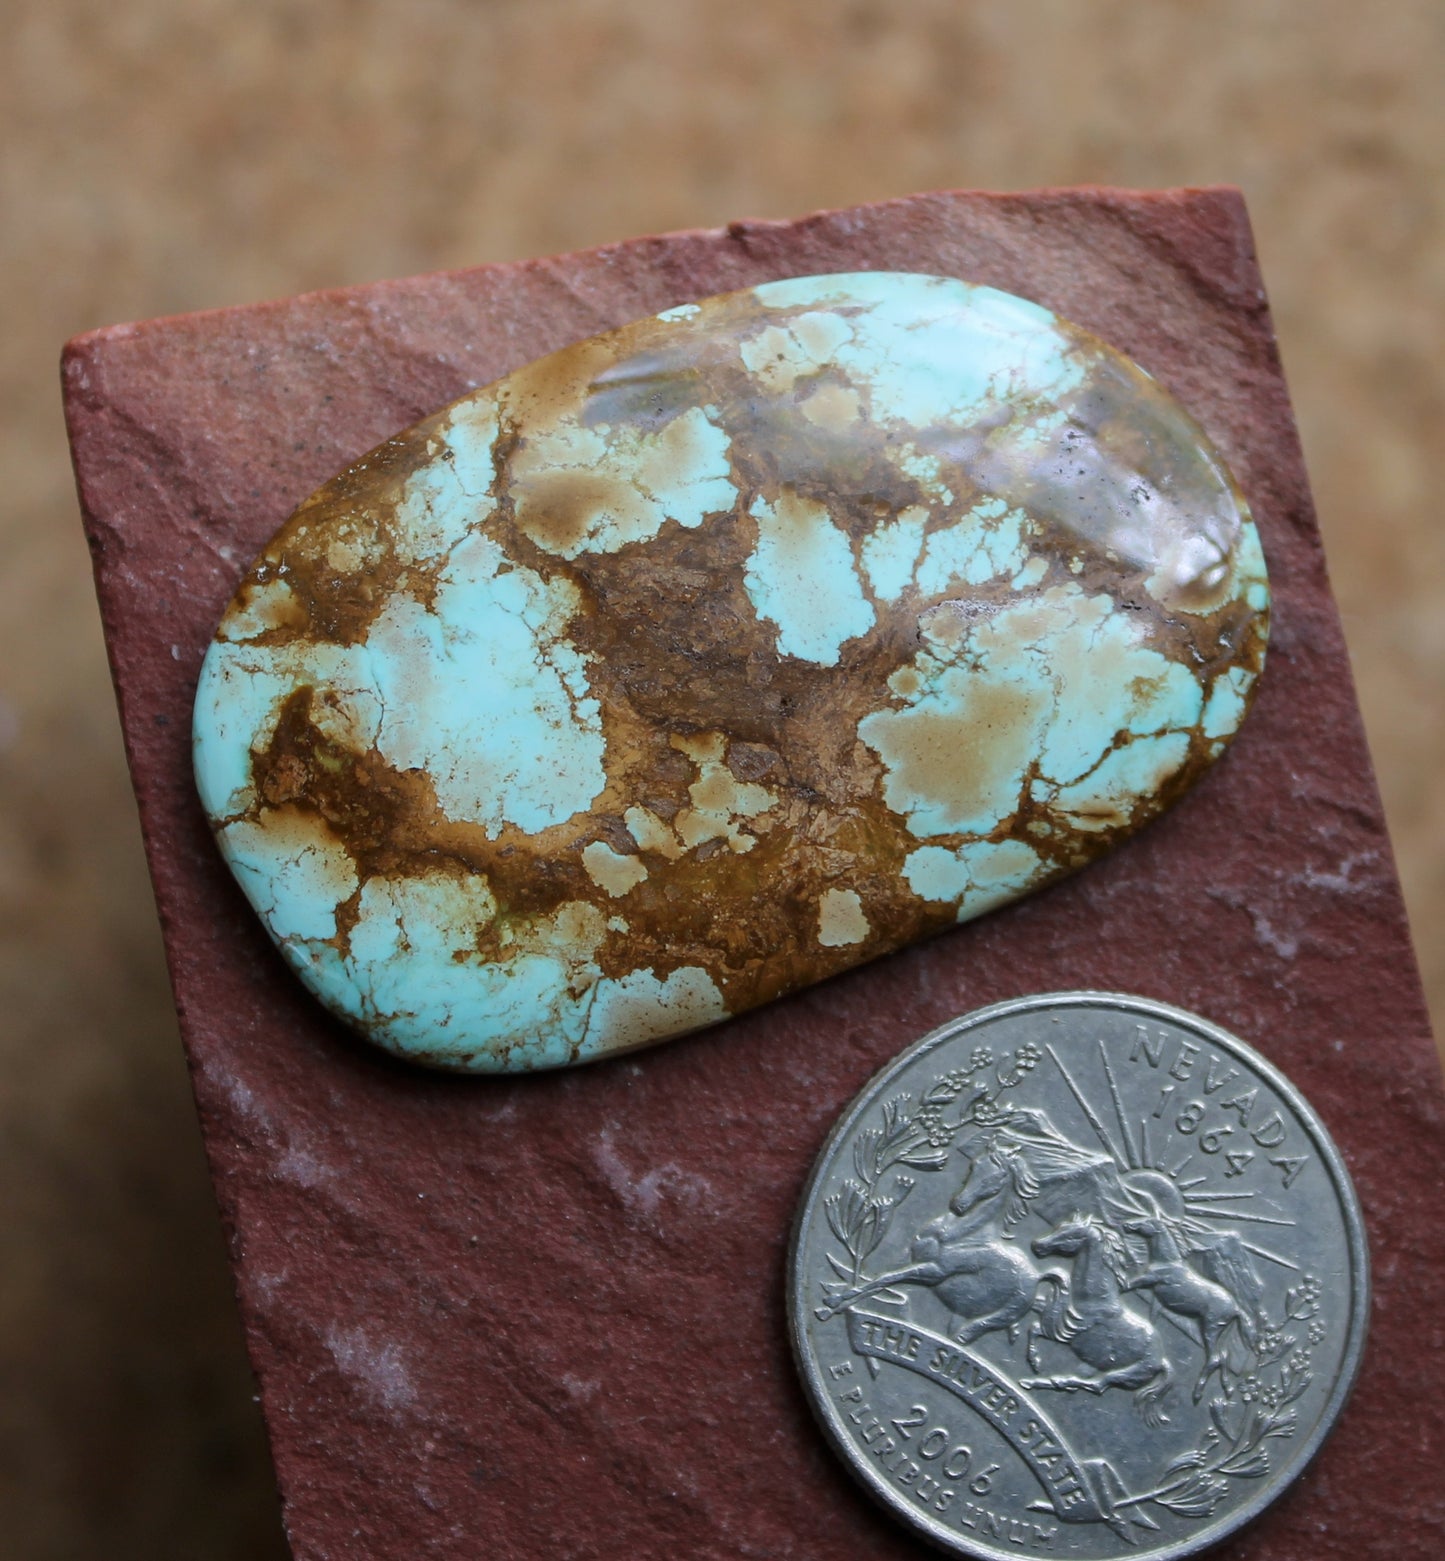 46 carat blue turquoise cabochon from Stone Mountain Mine with red matrix